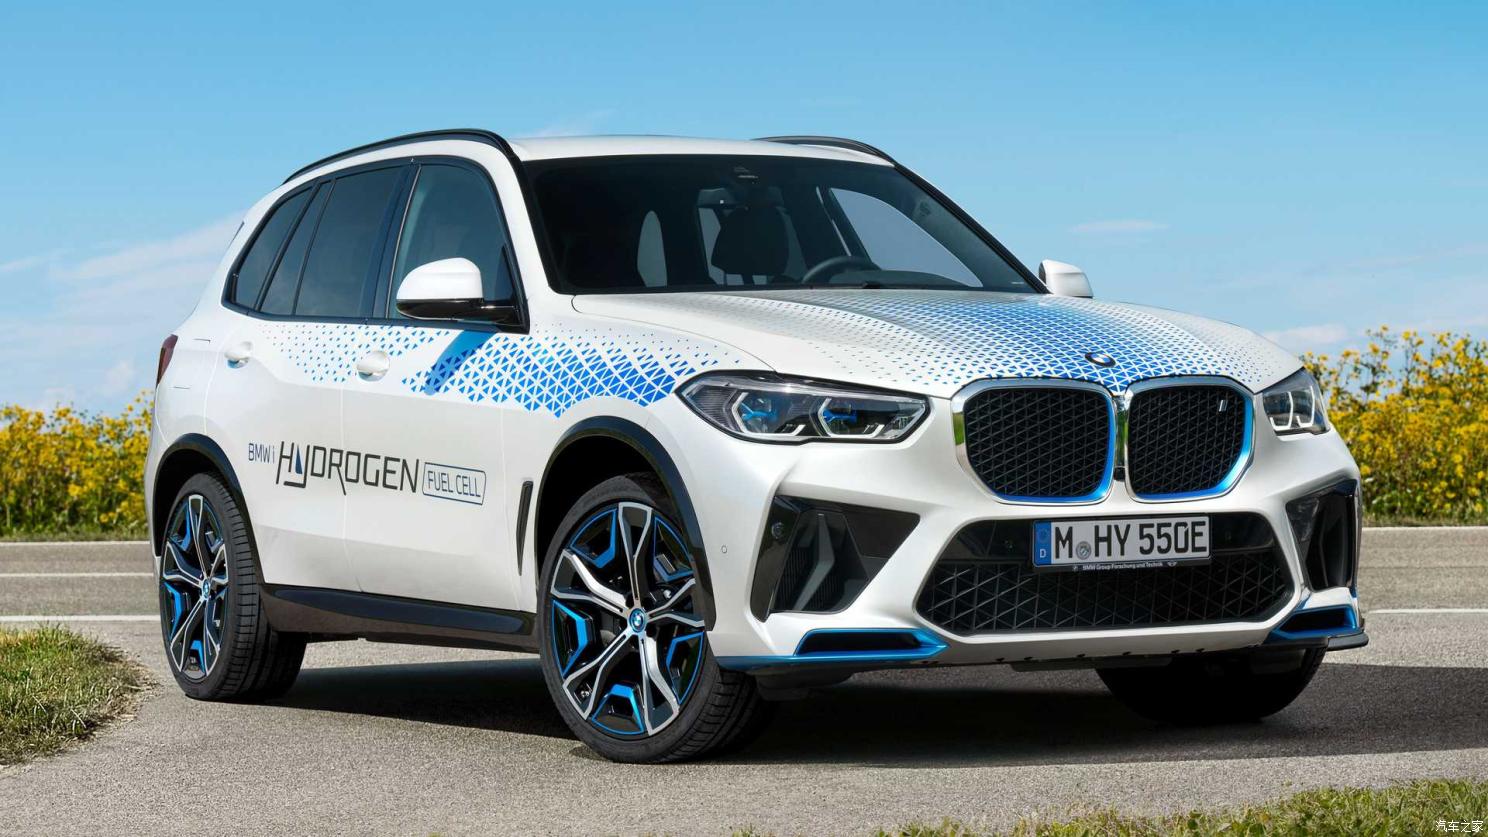 BMW has started production of the iX5 hydrogen fuel cell version